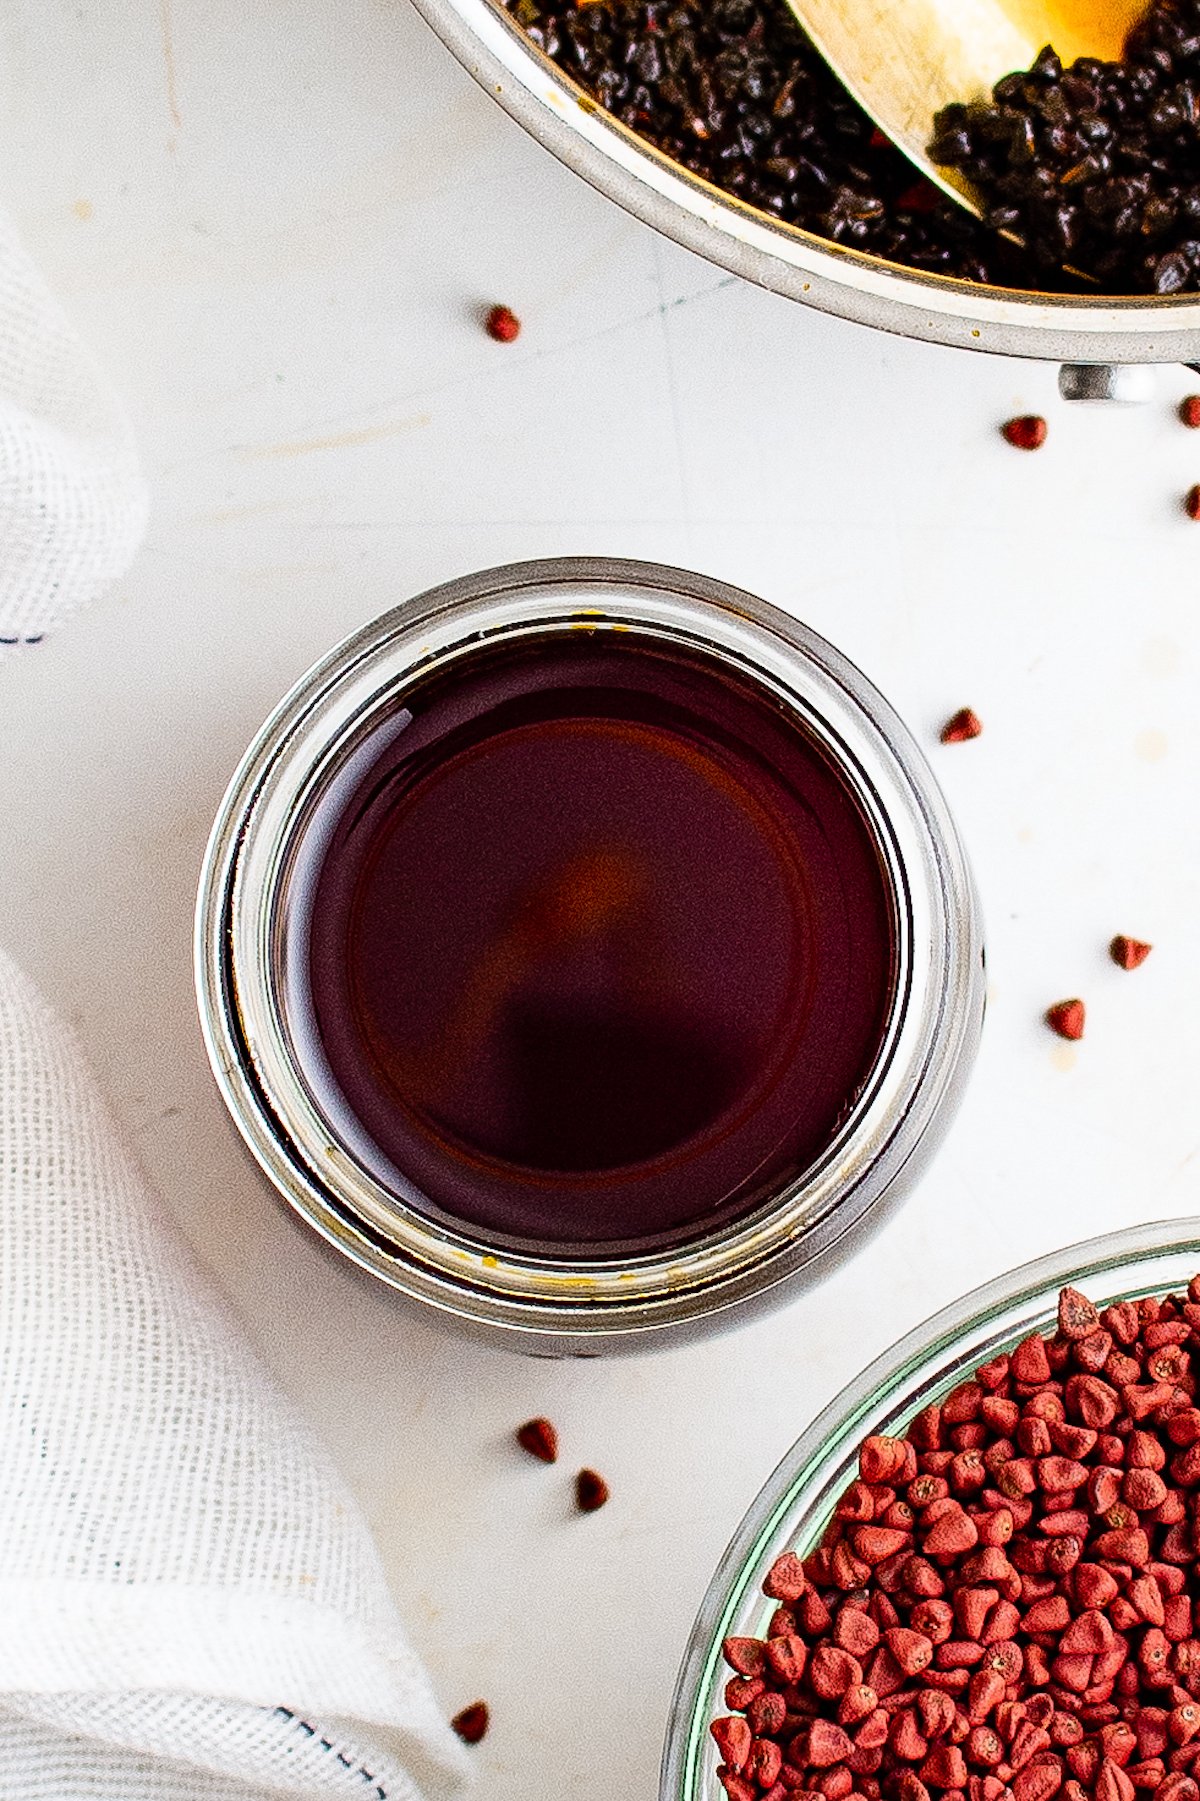 Overhead view of annatto oil in a glass jar, near a saucepan of leftover annatto seeds and a bowl of dried annatto seeds.